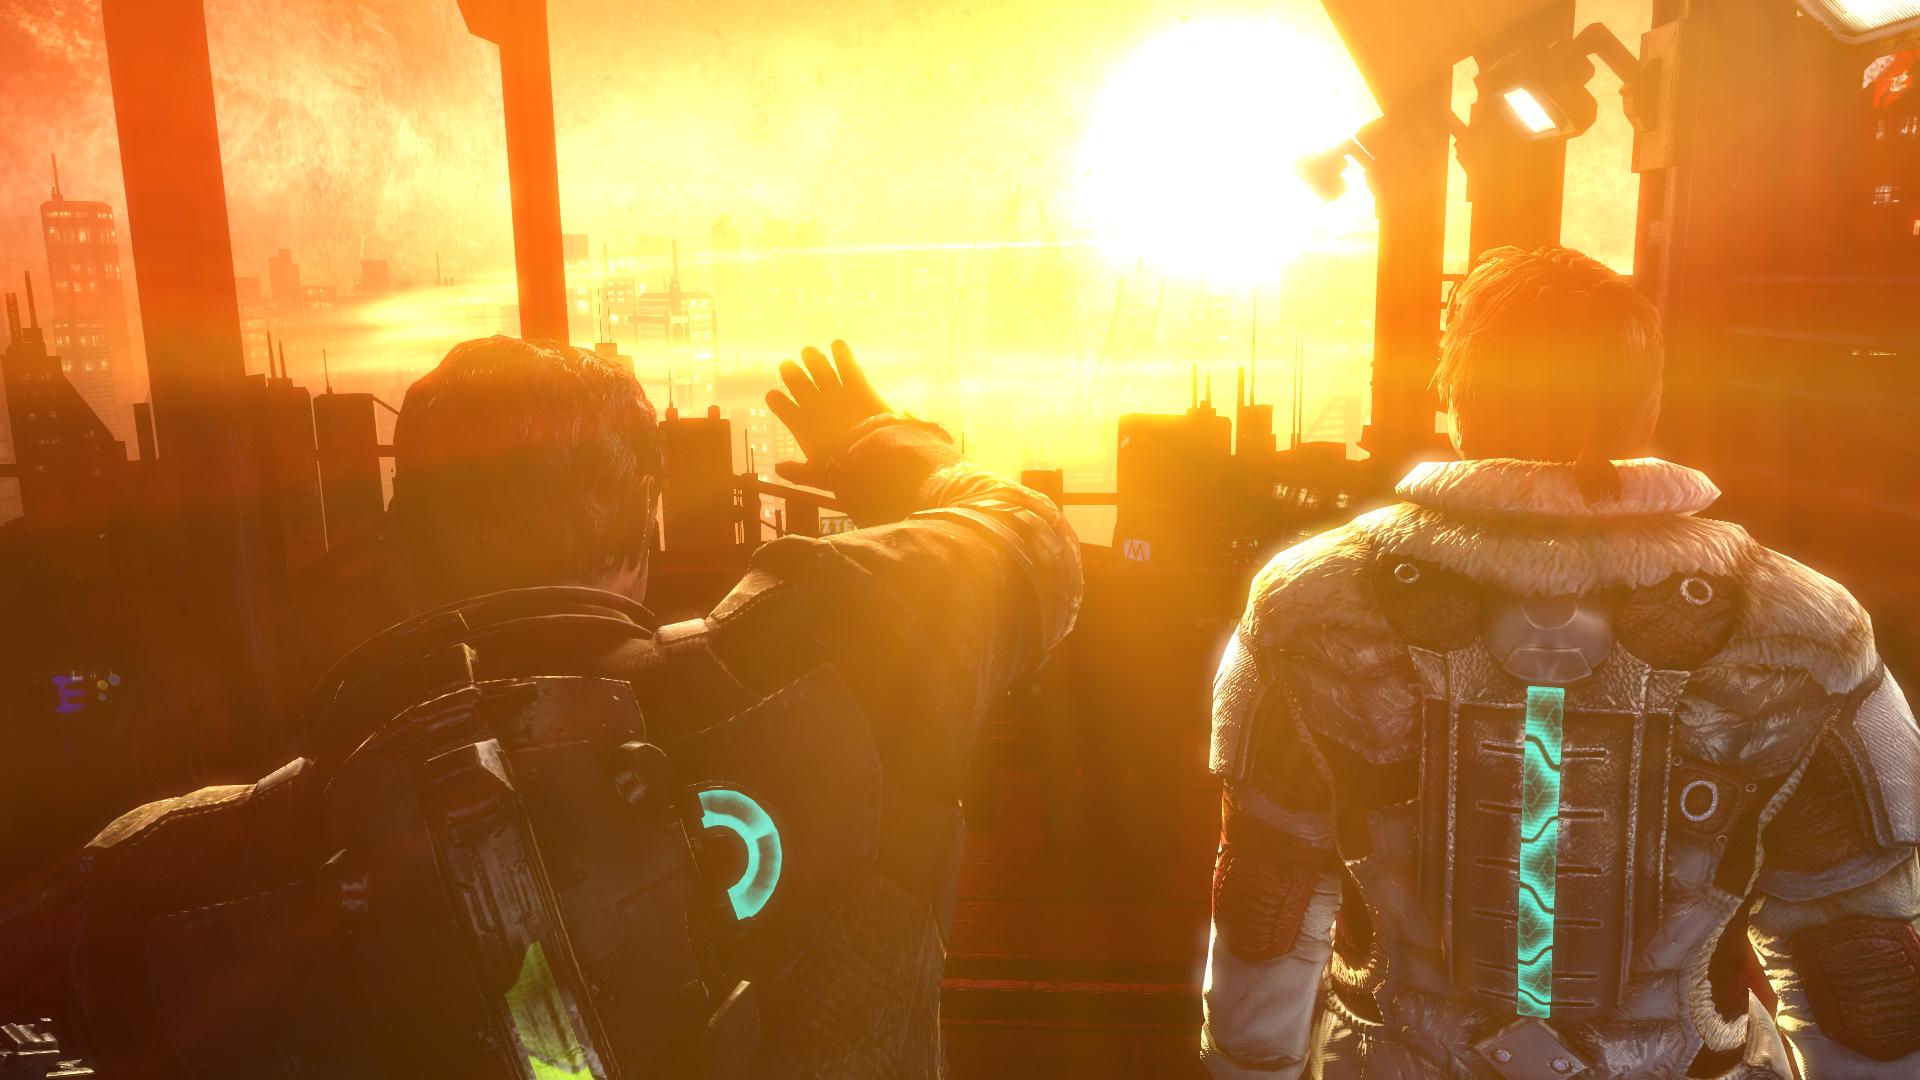 deadspace3 2013-02-13 23-03-16-00